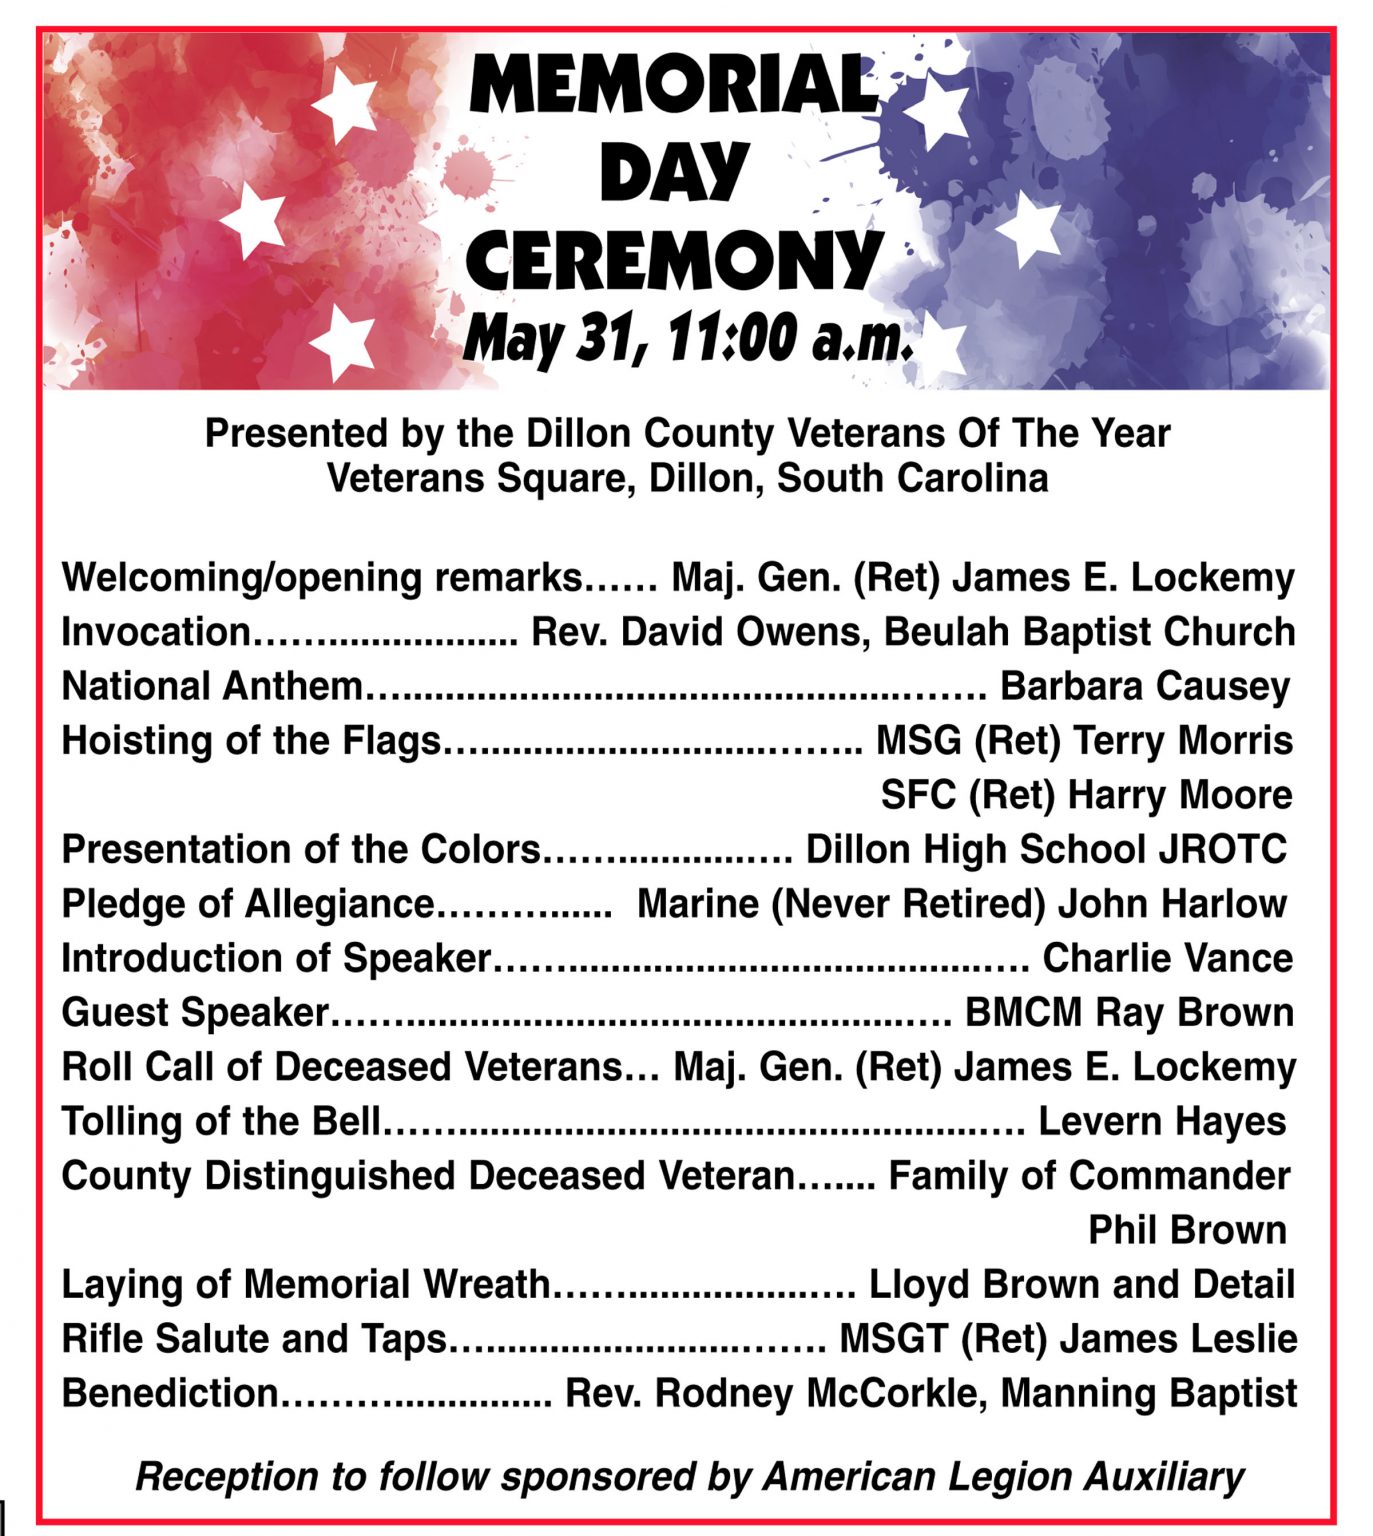 Memorial Day Service To Be Held On Monday, May 31 The Dillon Herald